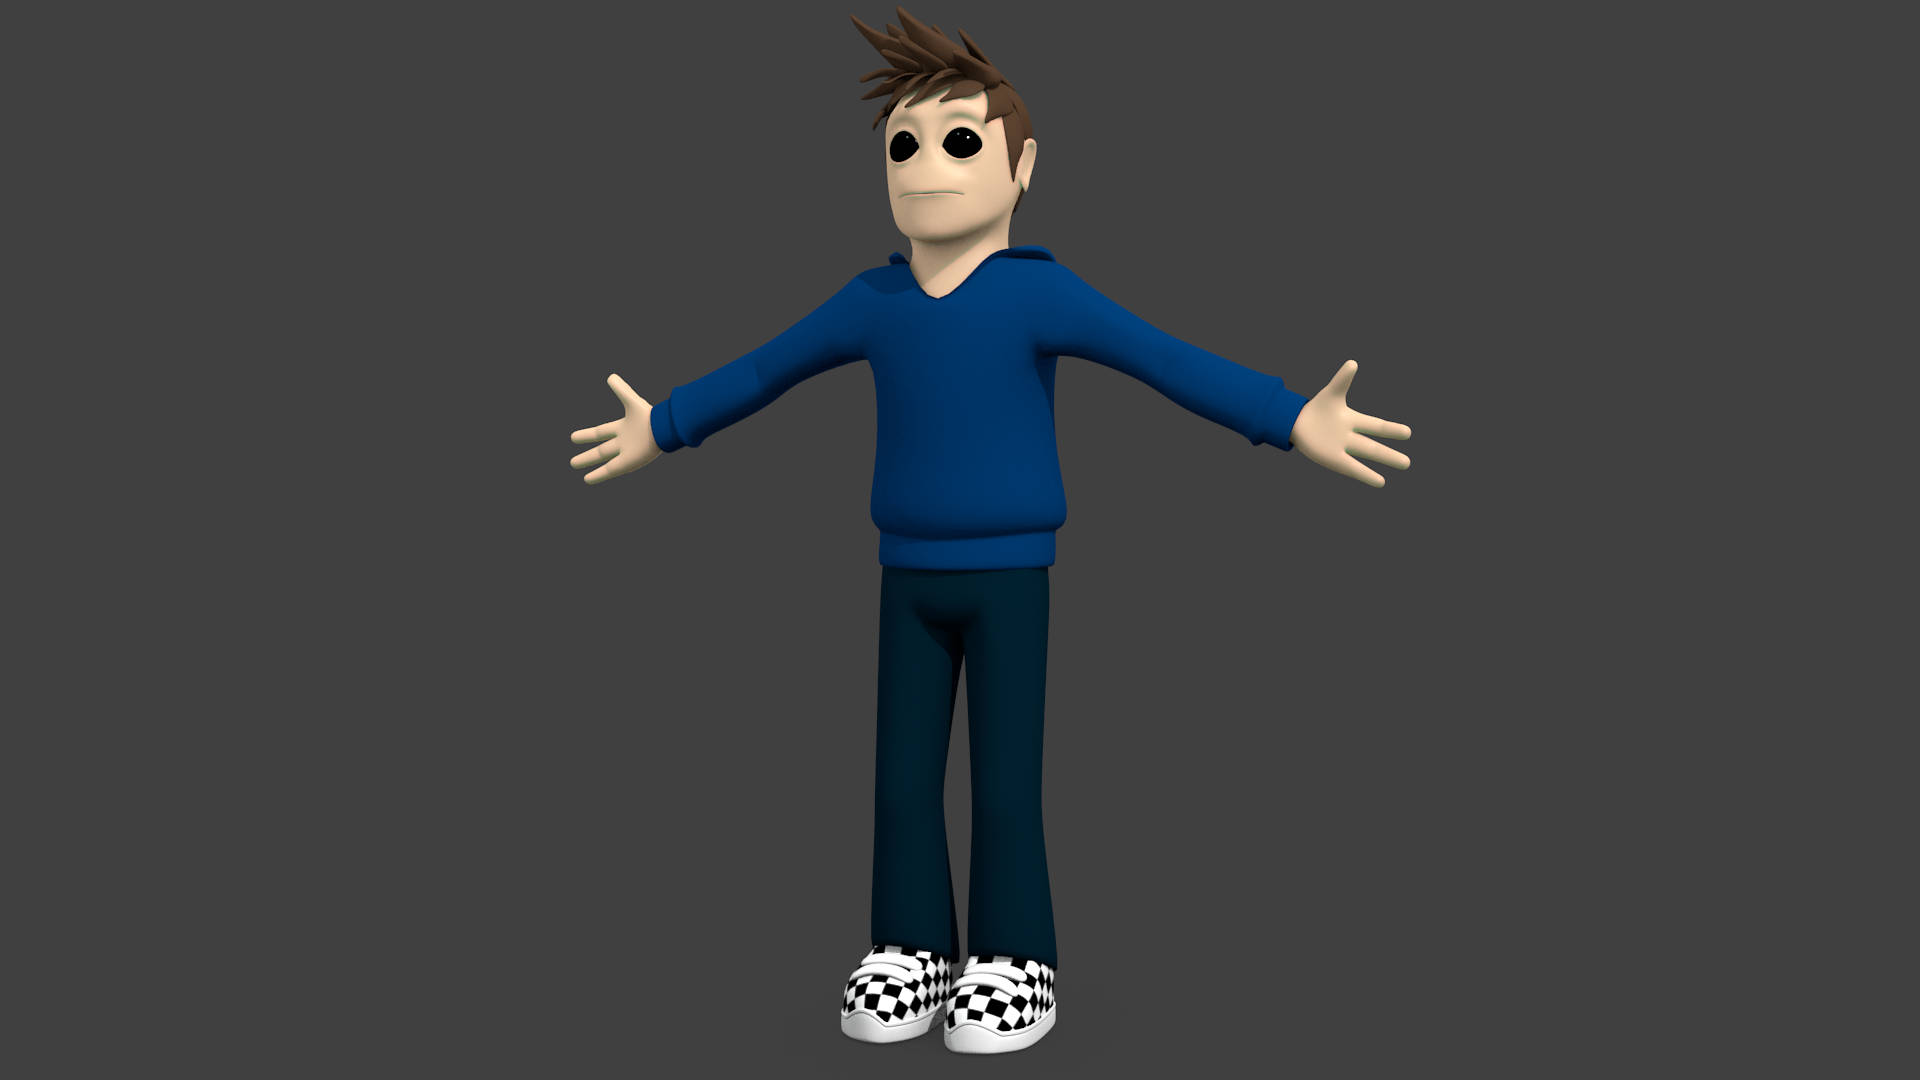 Tom From Eddsworld Opens His Arms